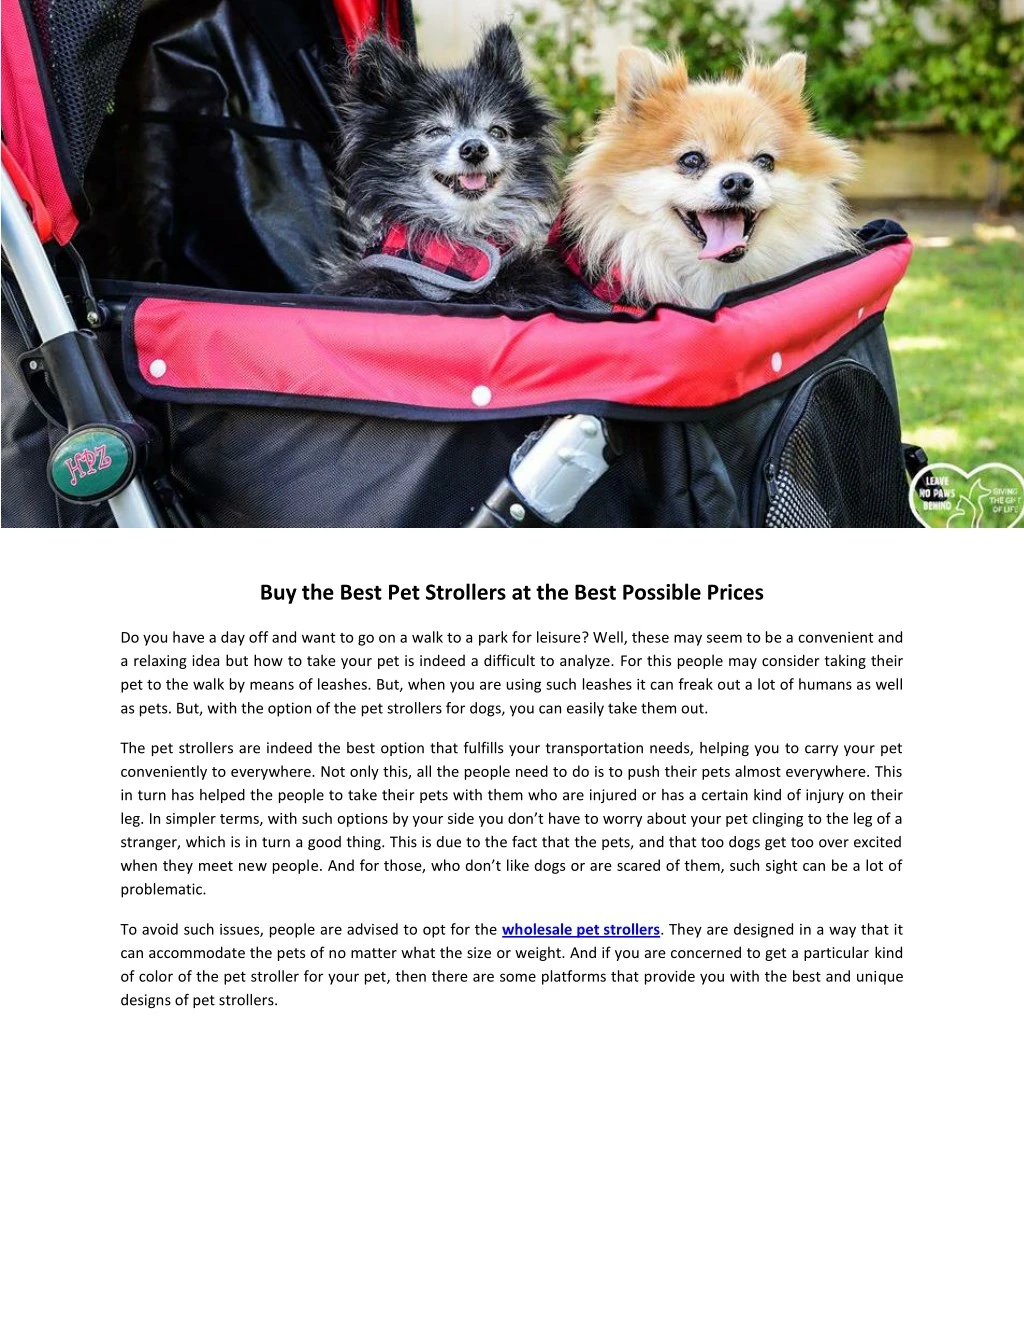 buy the best pet strollers at the best possible